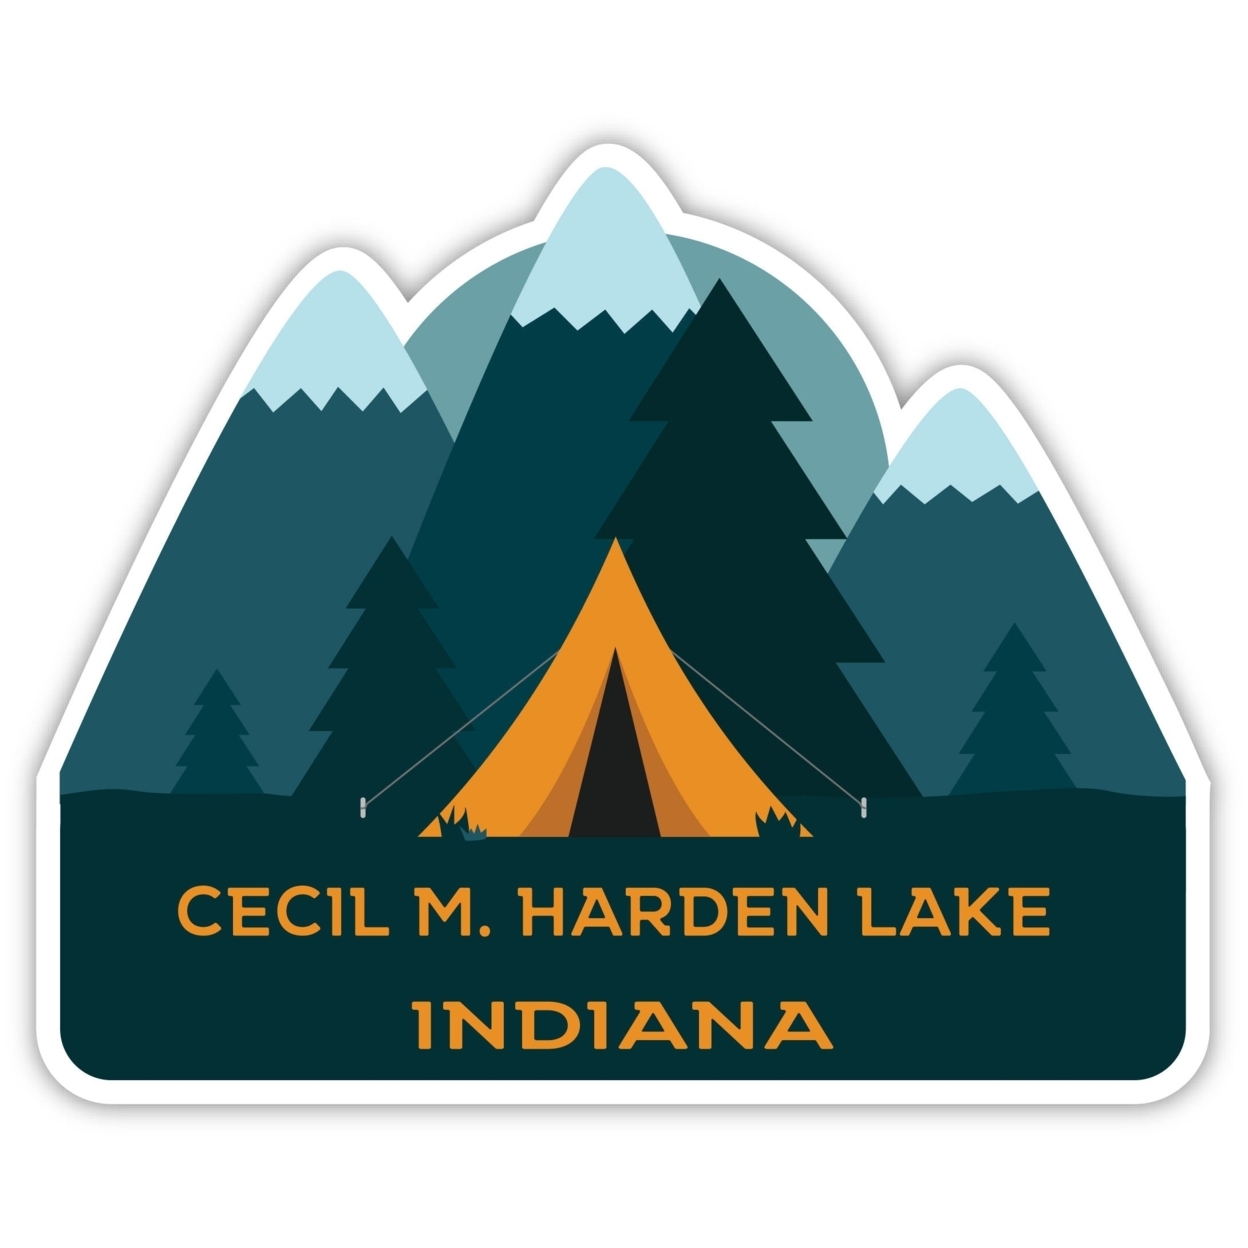 Cecil M. Harden Lake Indiana Souvenir Decorative Stickers (Choose Theme And Size) - 4-Pack, 12-Inch, Tent